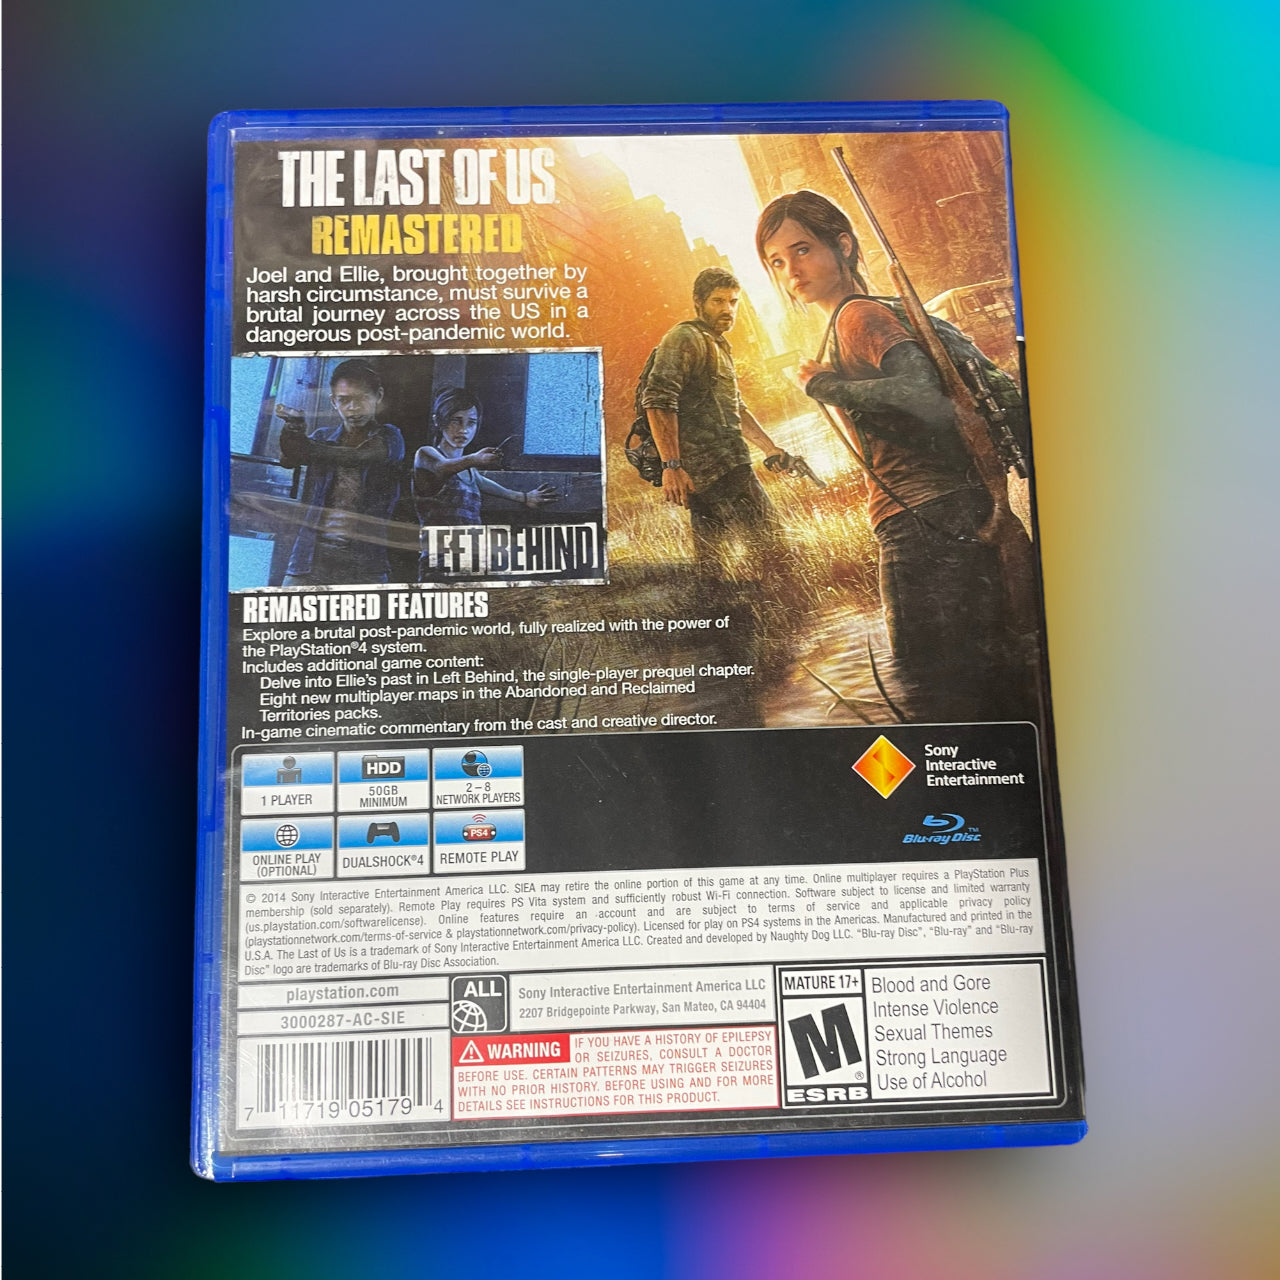 The Last of Us Remastered (Sony PlayStation 4, 2014)